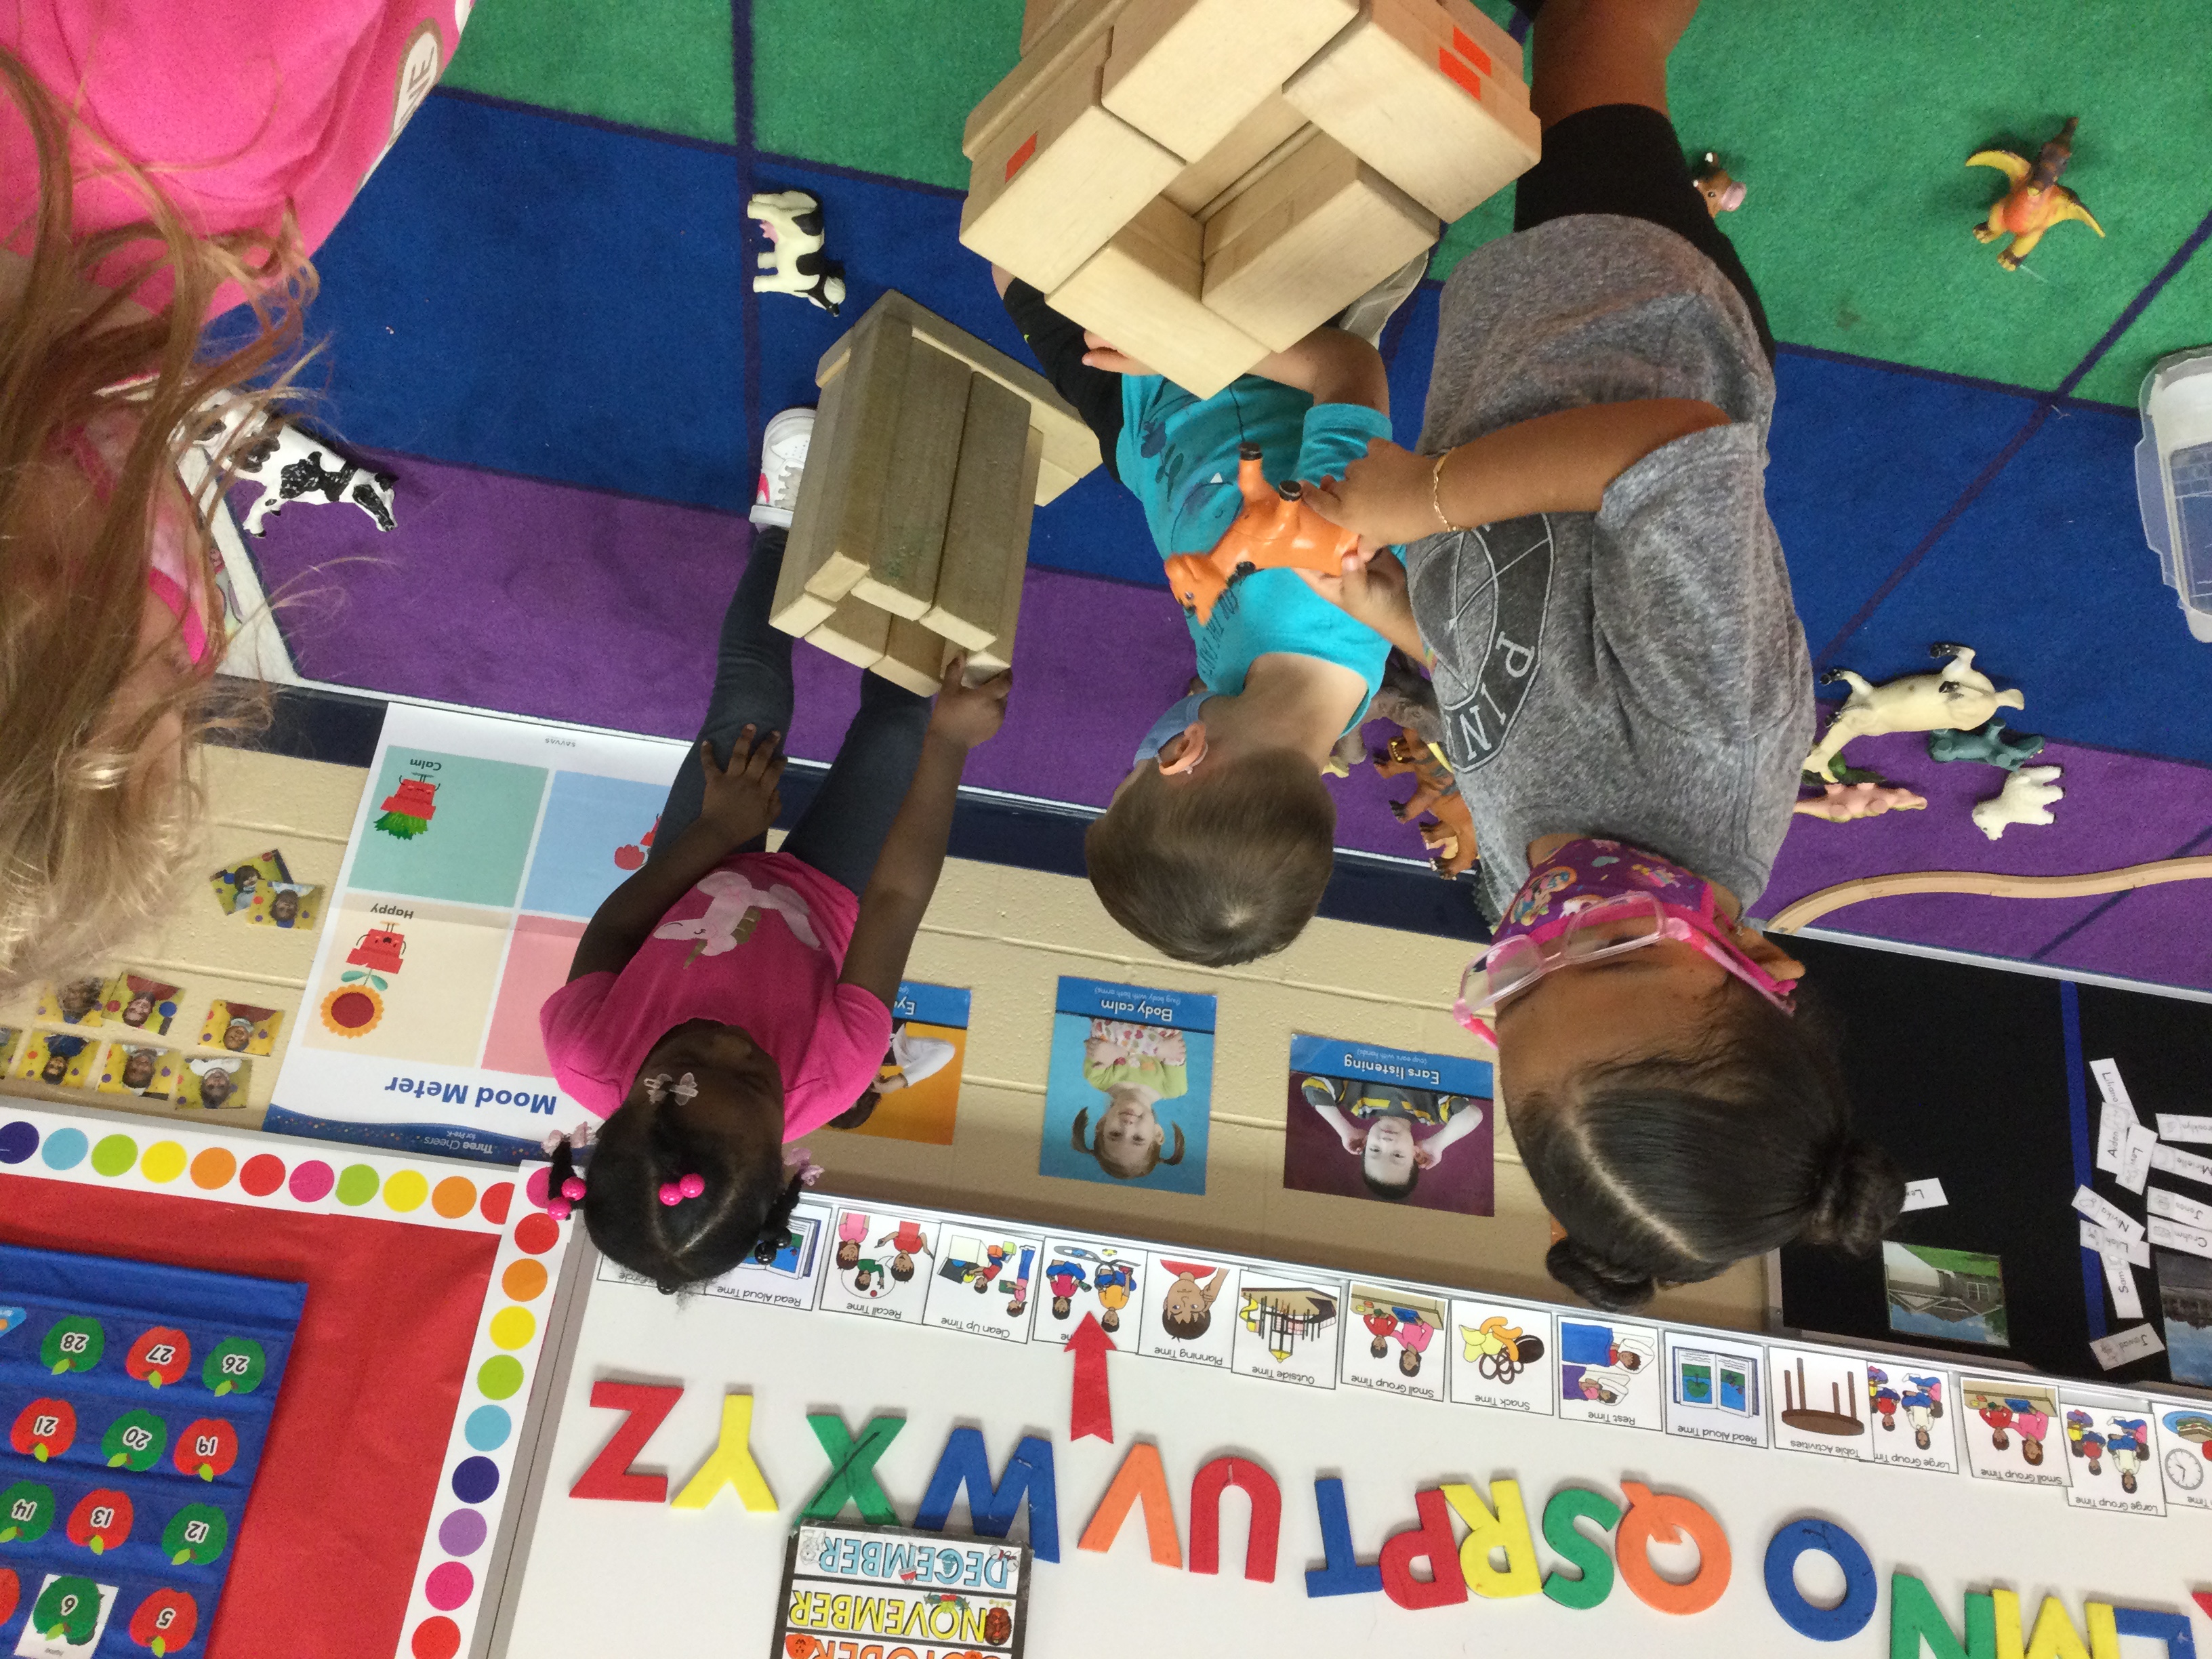 Students playing with wooden blocks.